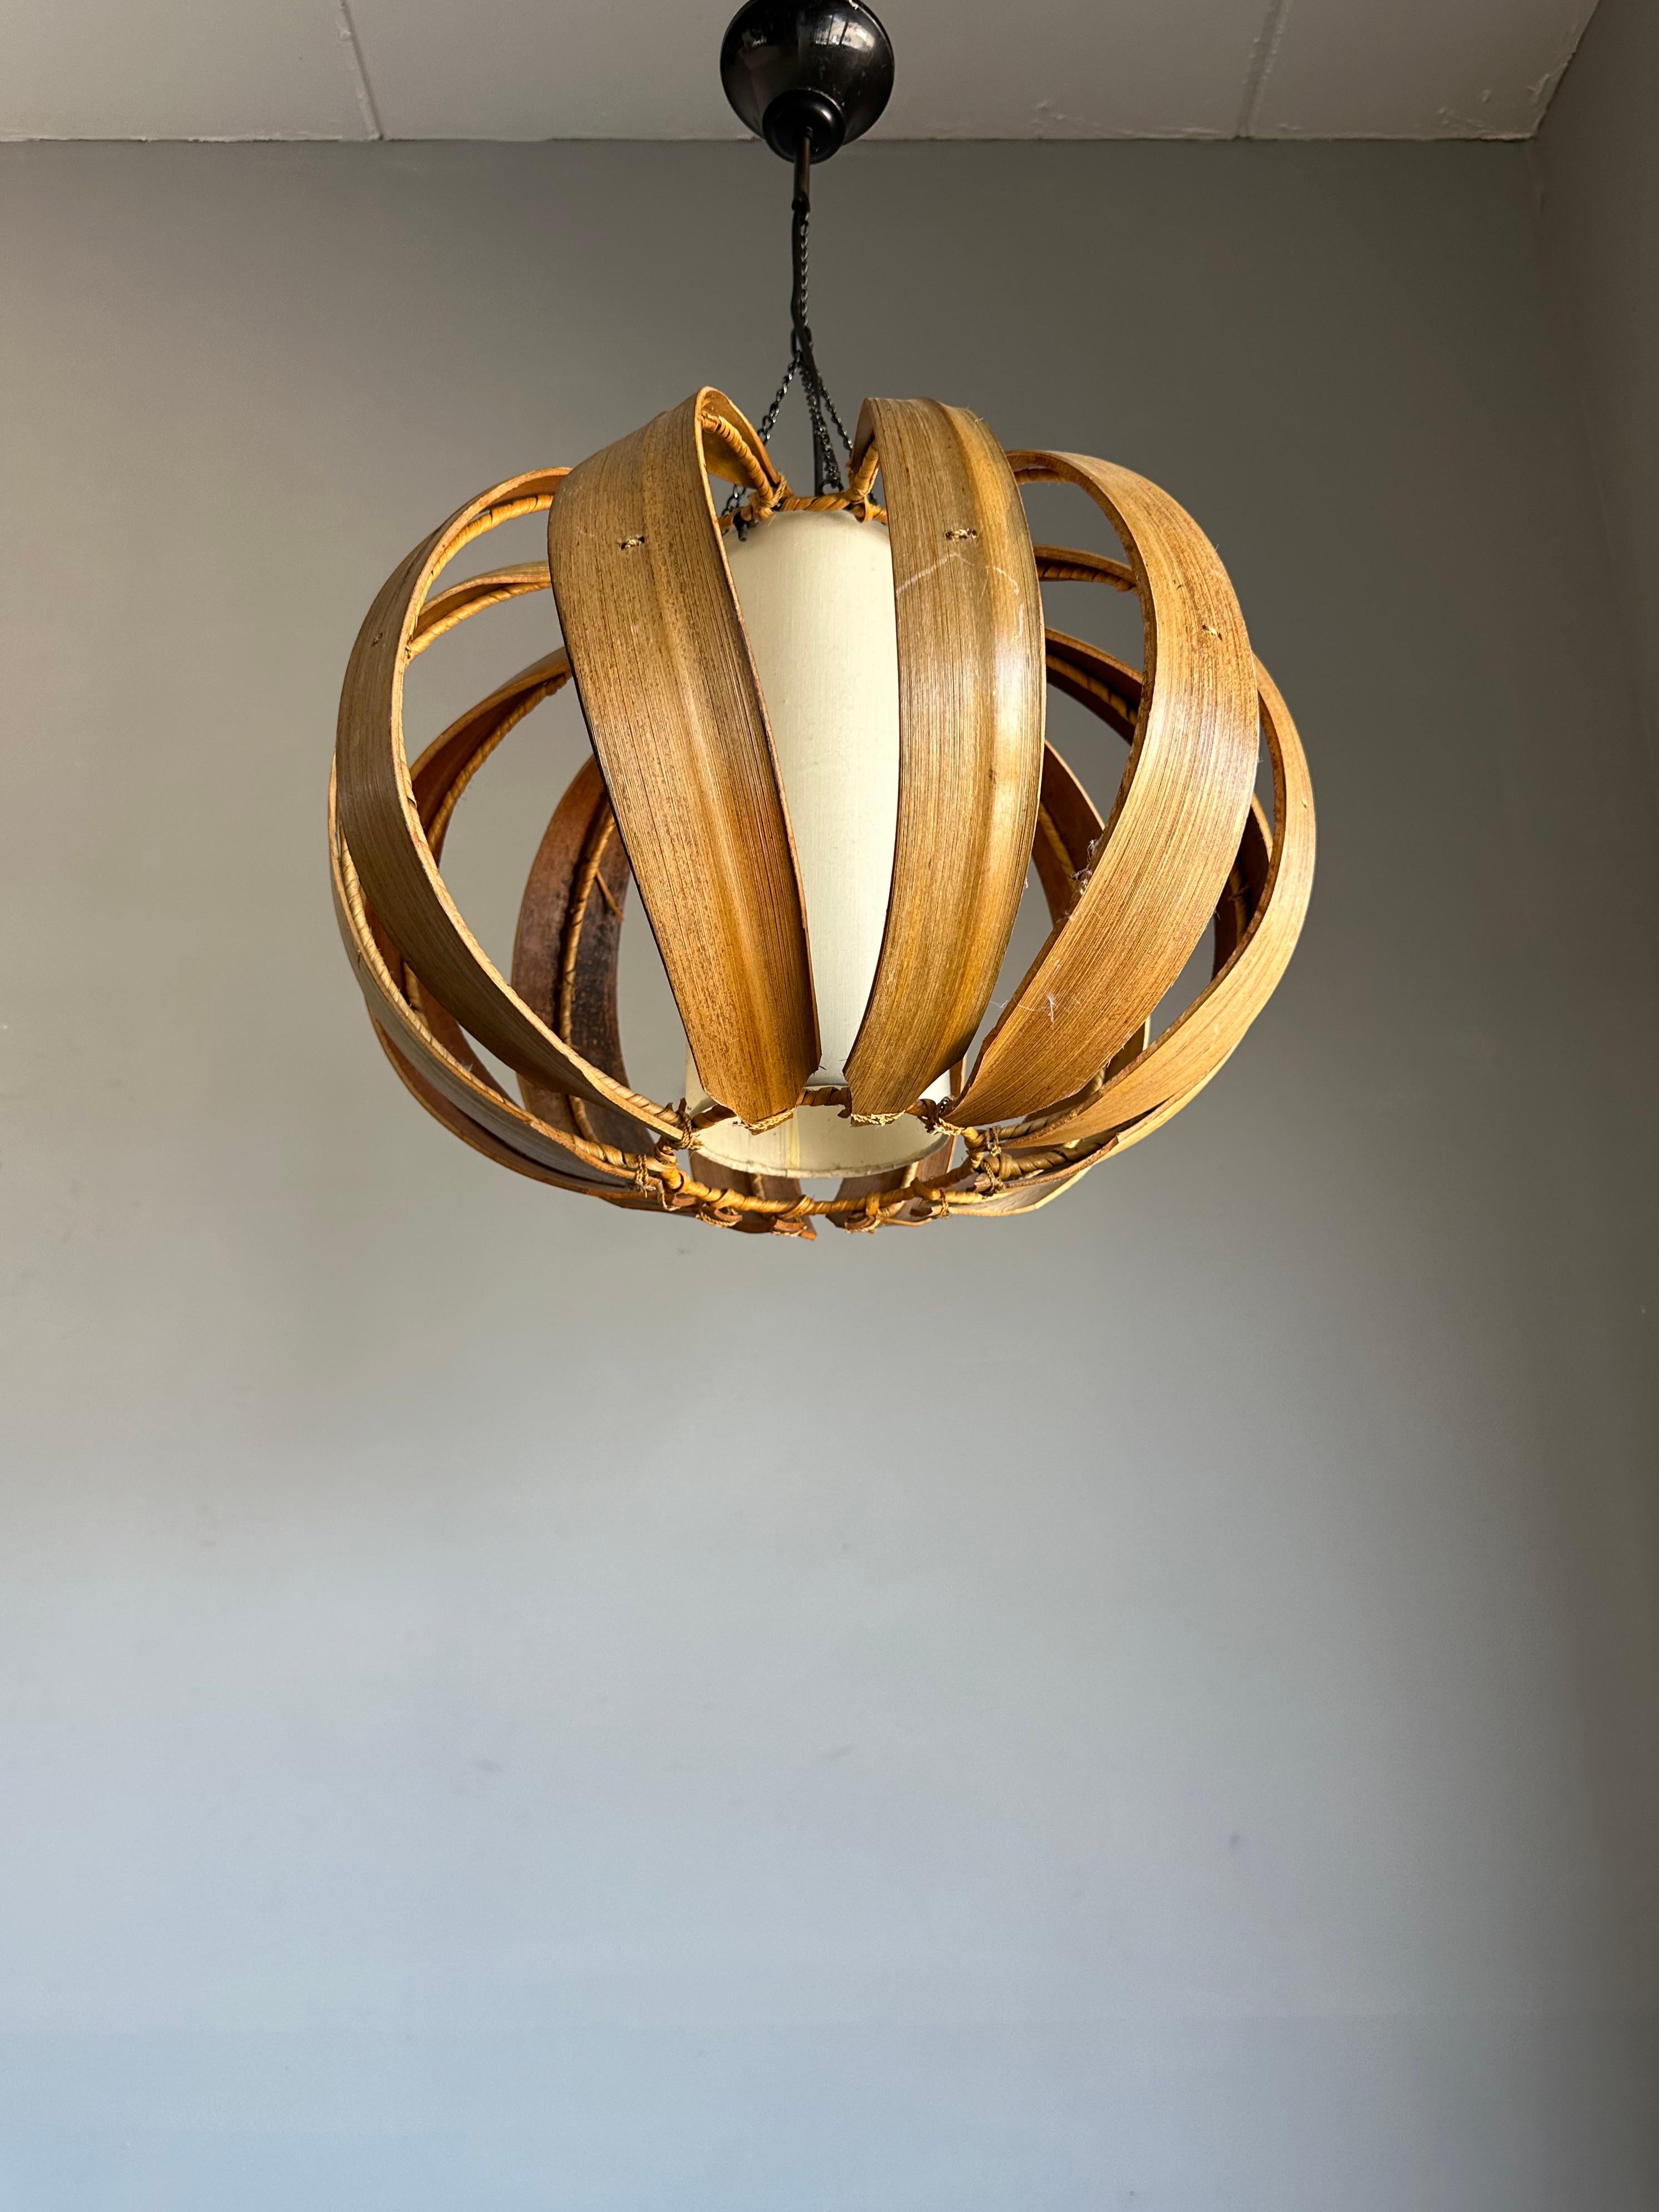 Wonderfully stylish and beautifully handcrafted, midcentury pendant.

This 1980s pendant is perfect for bringing light to your midcentury, but also to your (organic) modern day kitchen table, living room, bedroom, etc. The beautifully designed